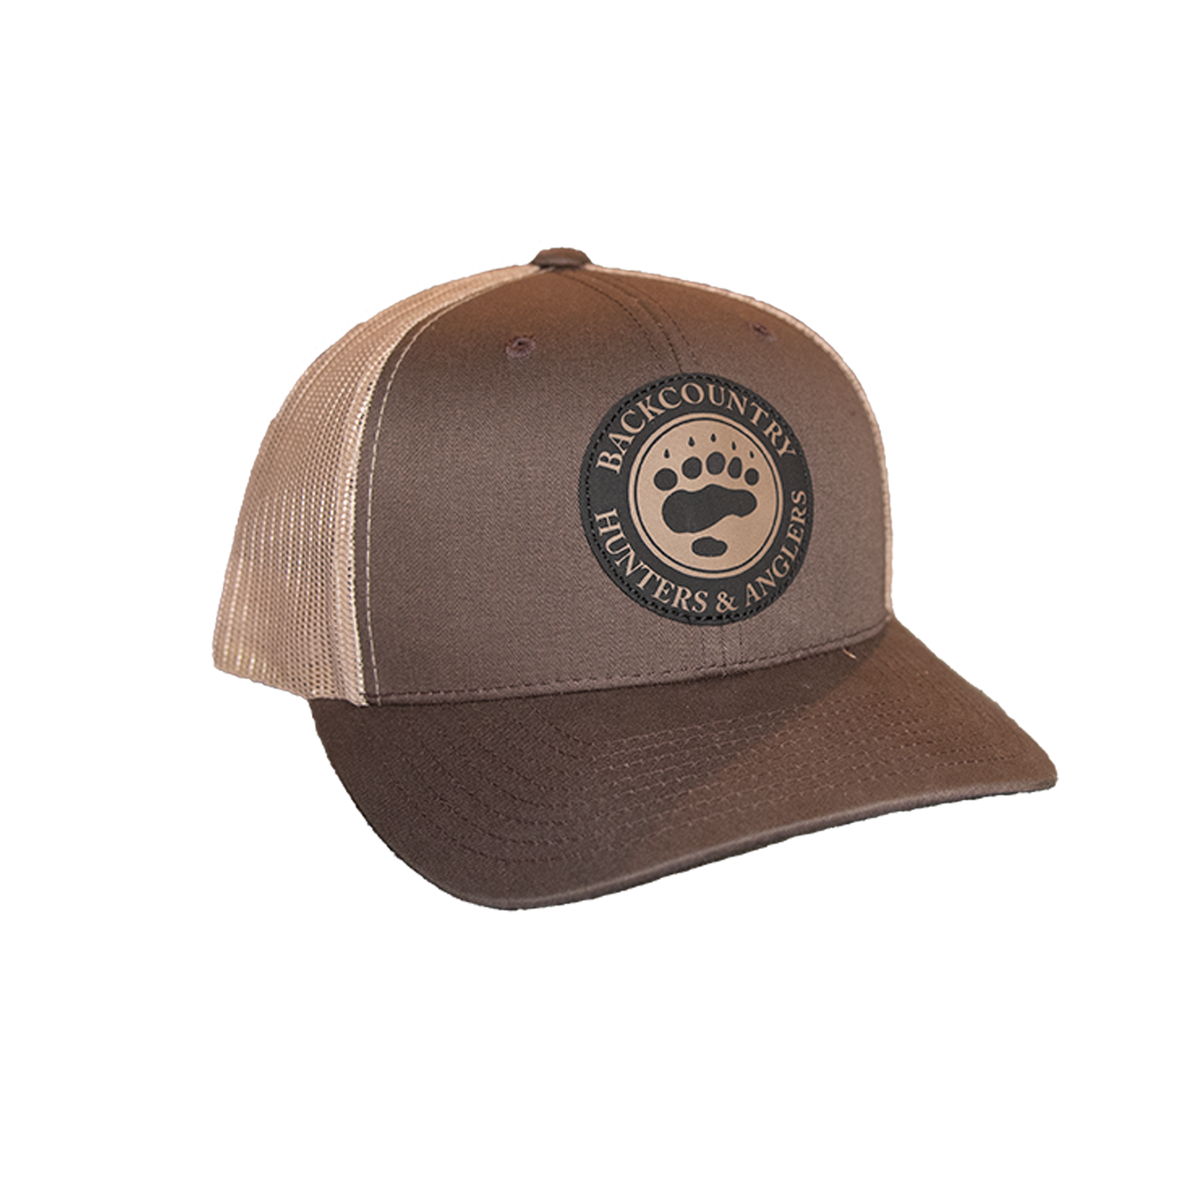 Armed Forces Trucker Hat - Brown / Khaki